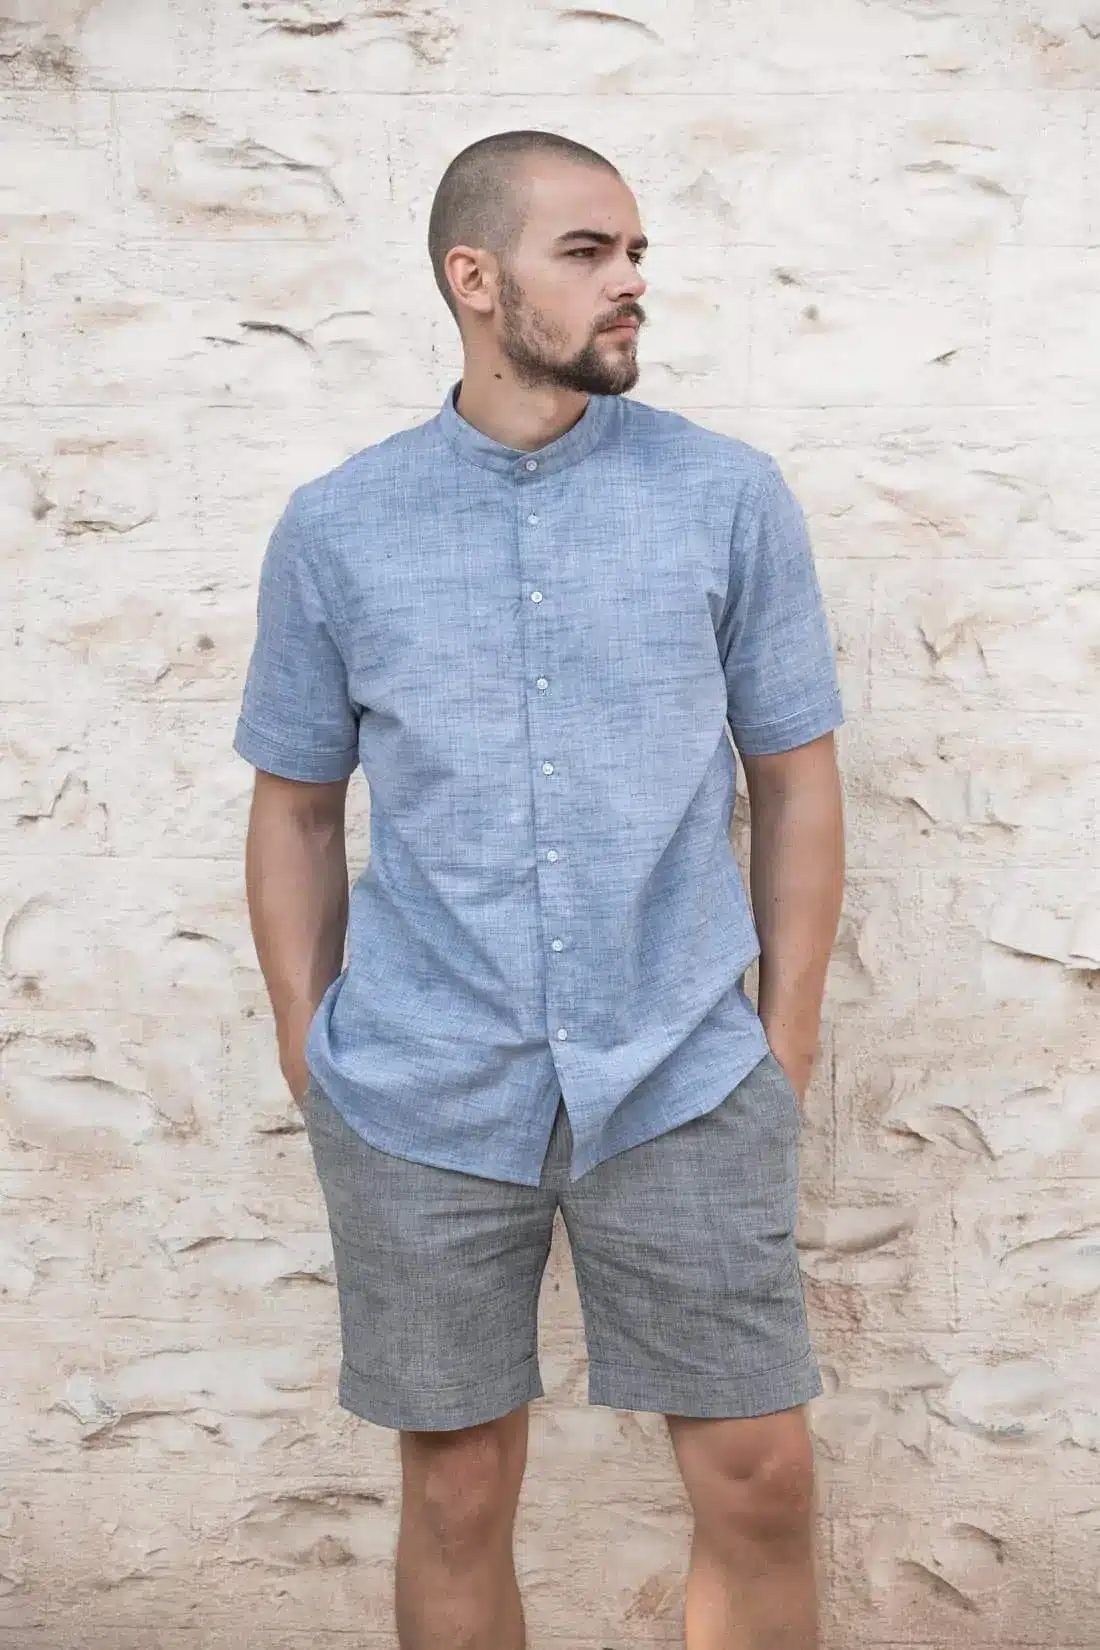 The 11 Best Non-Toxic & Sustainable Clothing Brands for Men